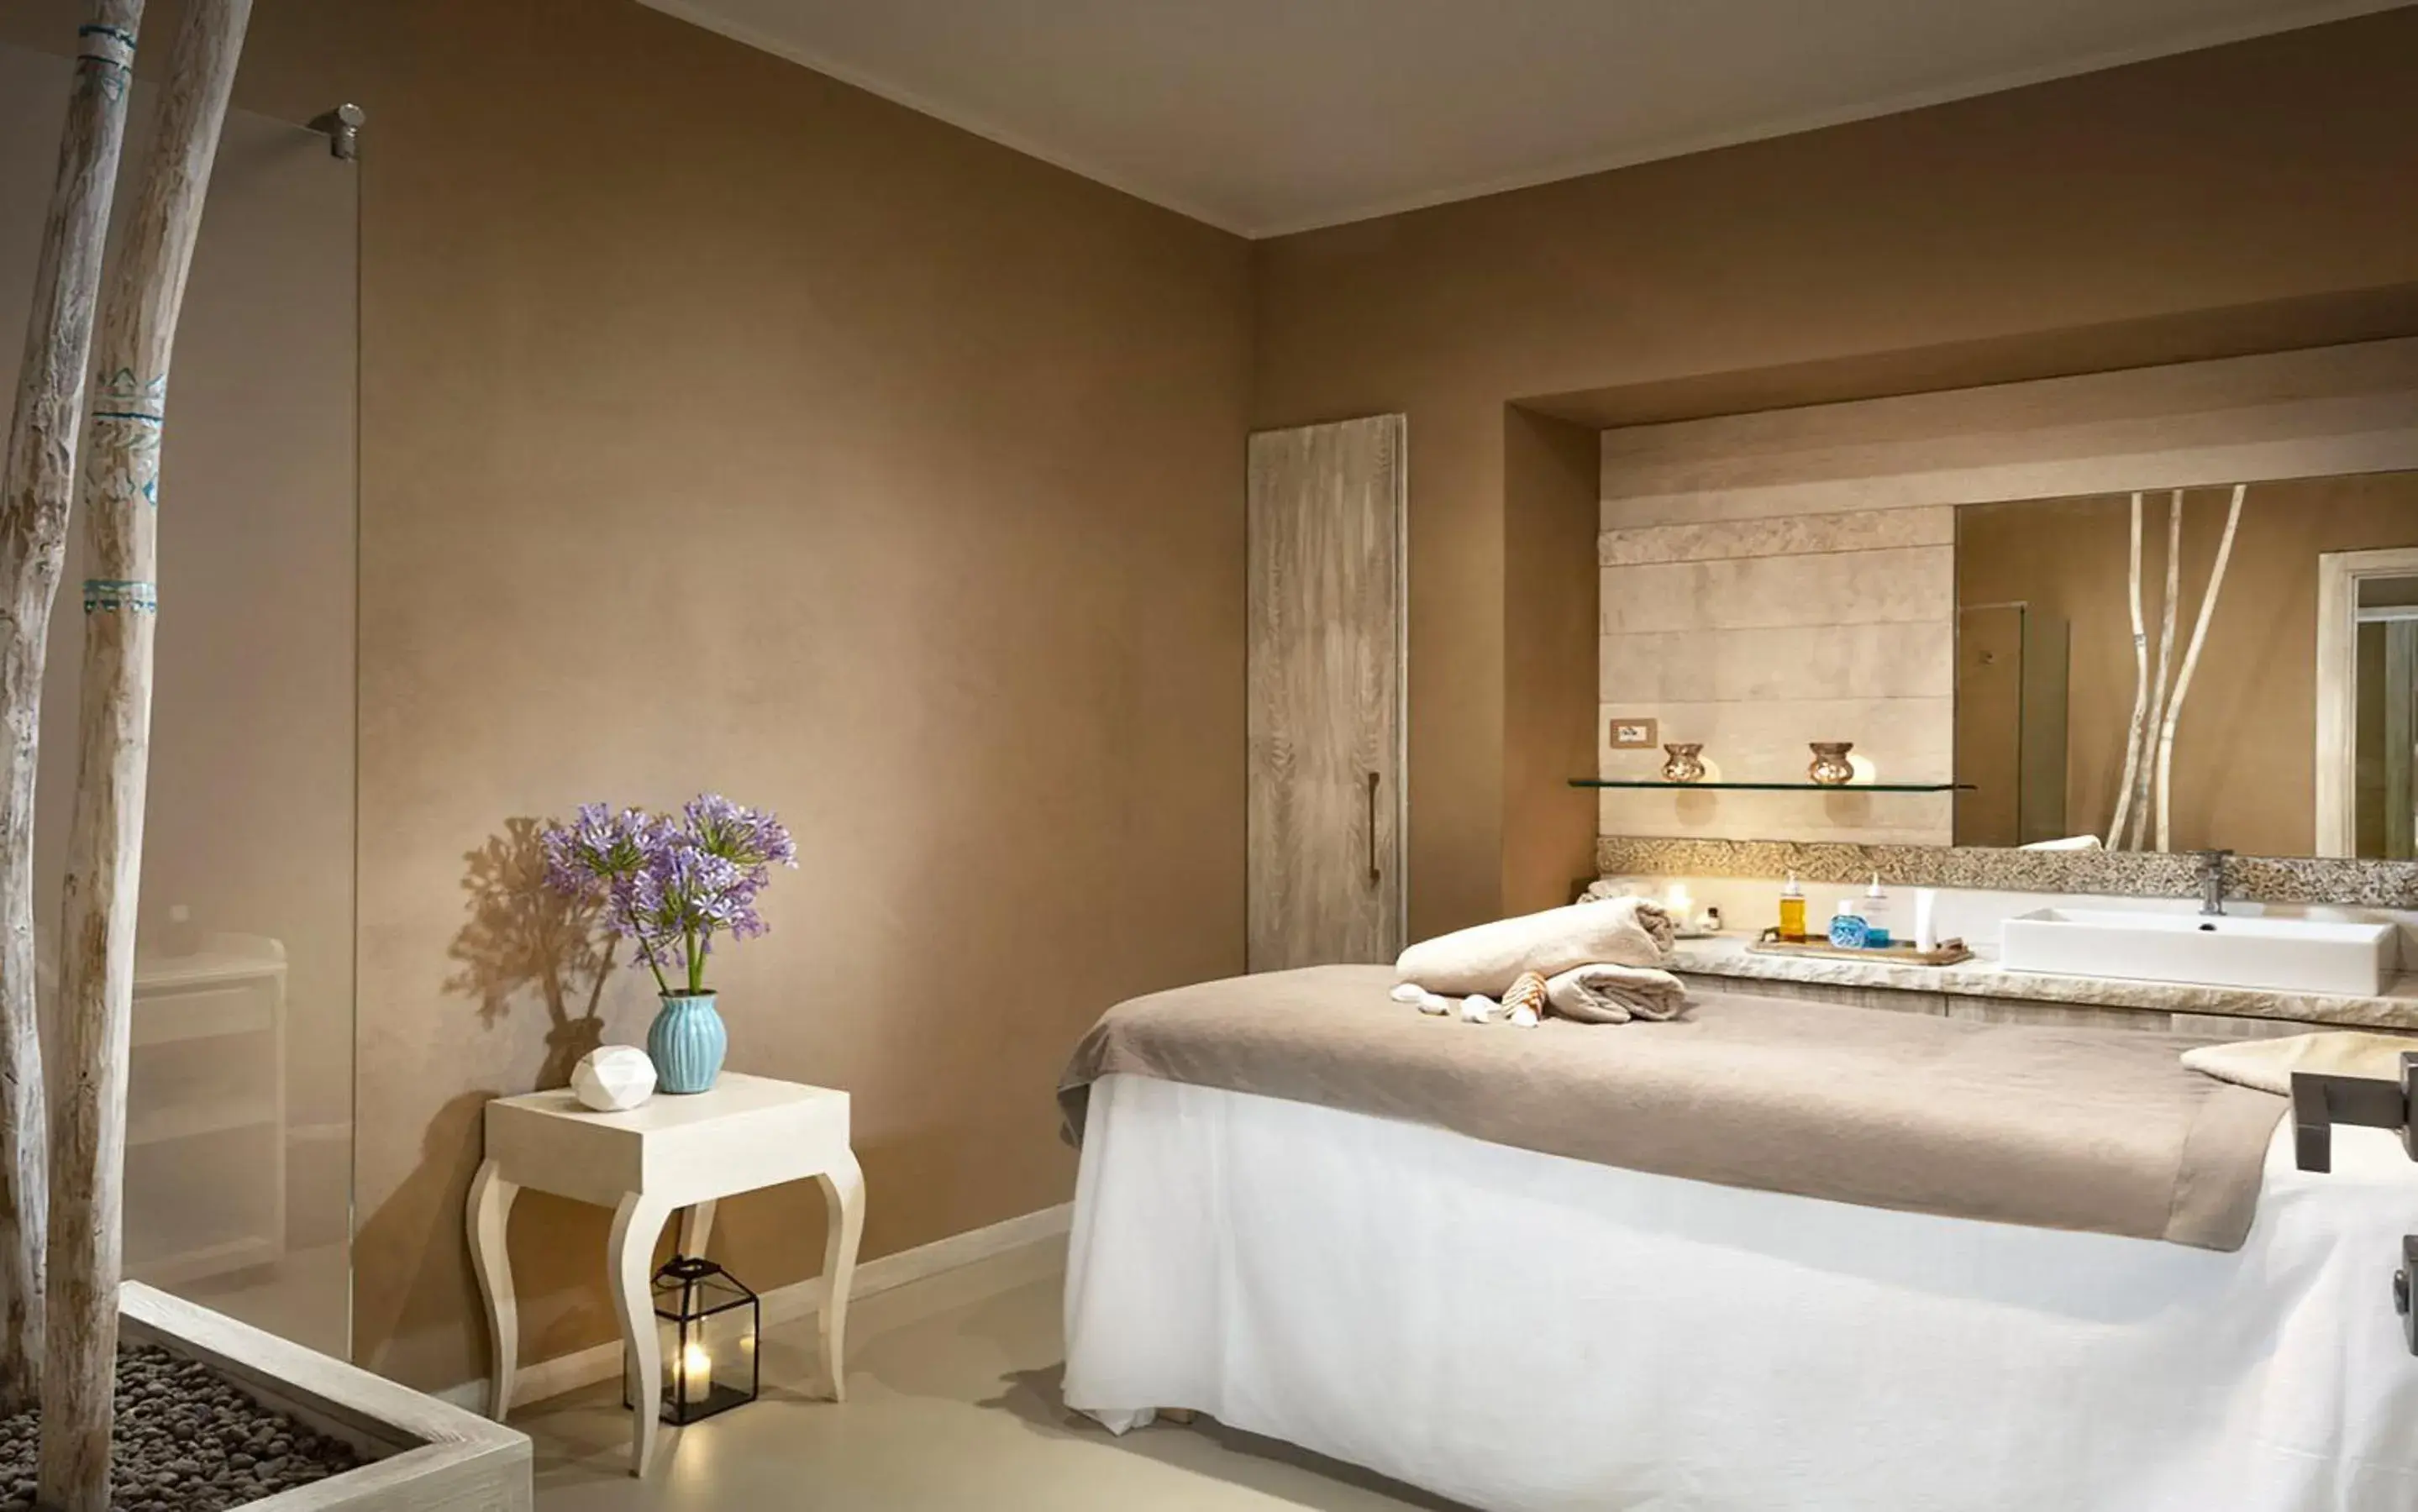 Massage in Baglioni Resort Sardinia - The Leading Hotels of the World